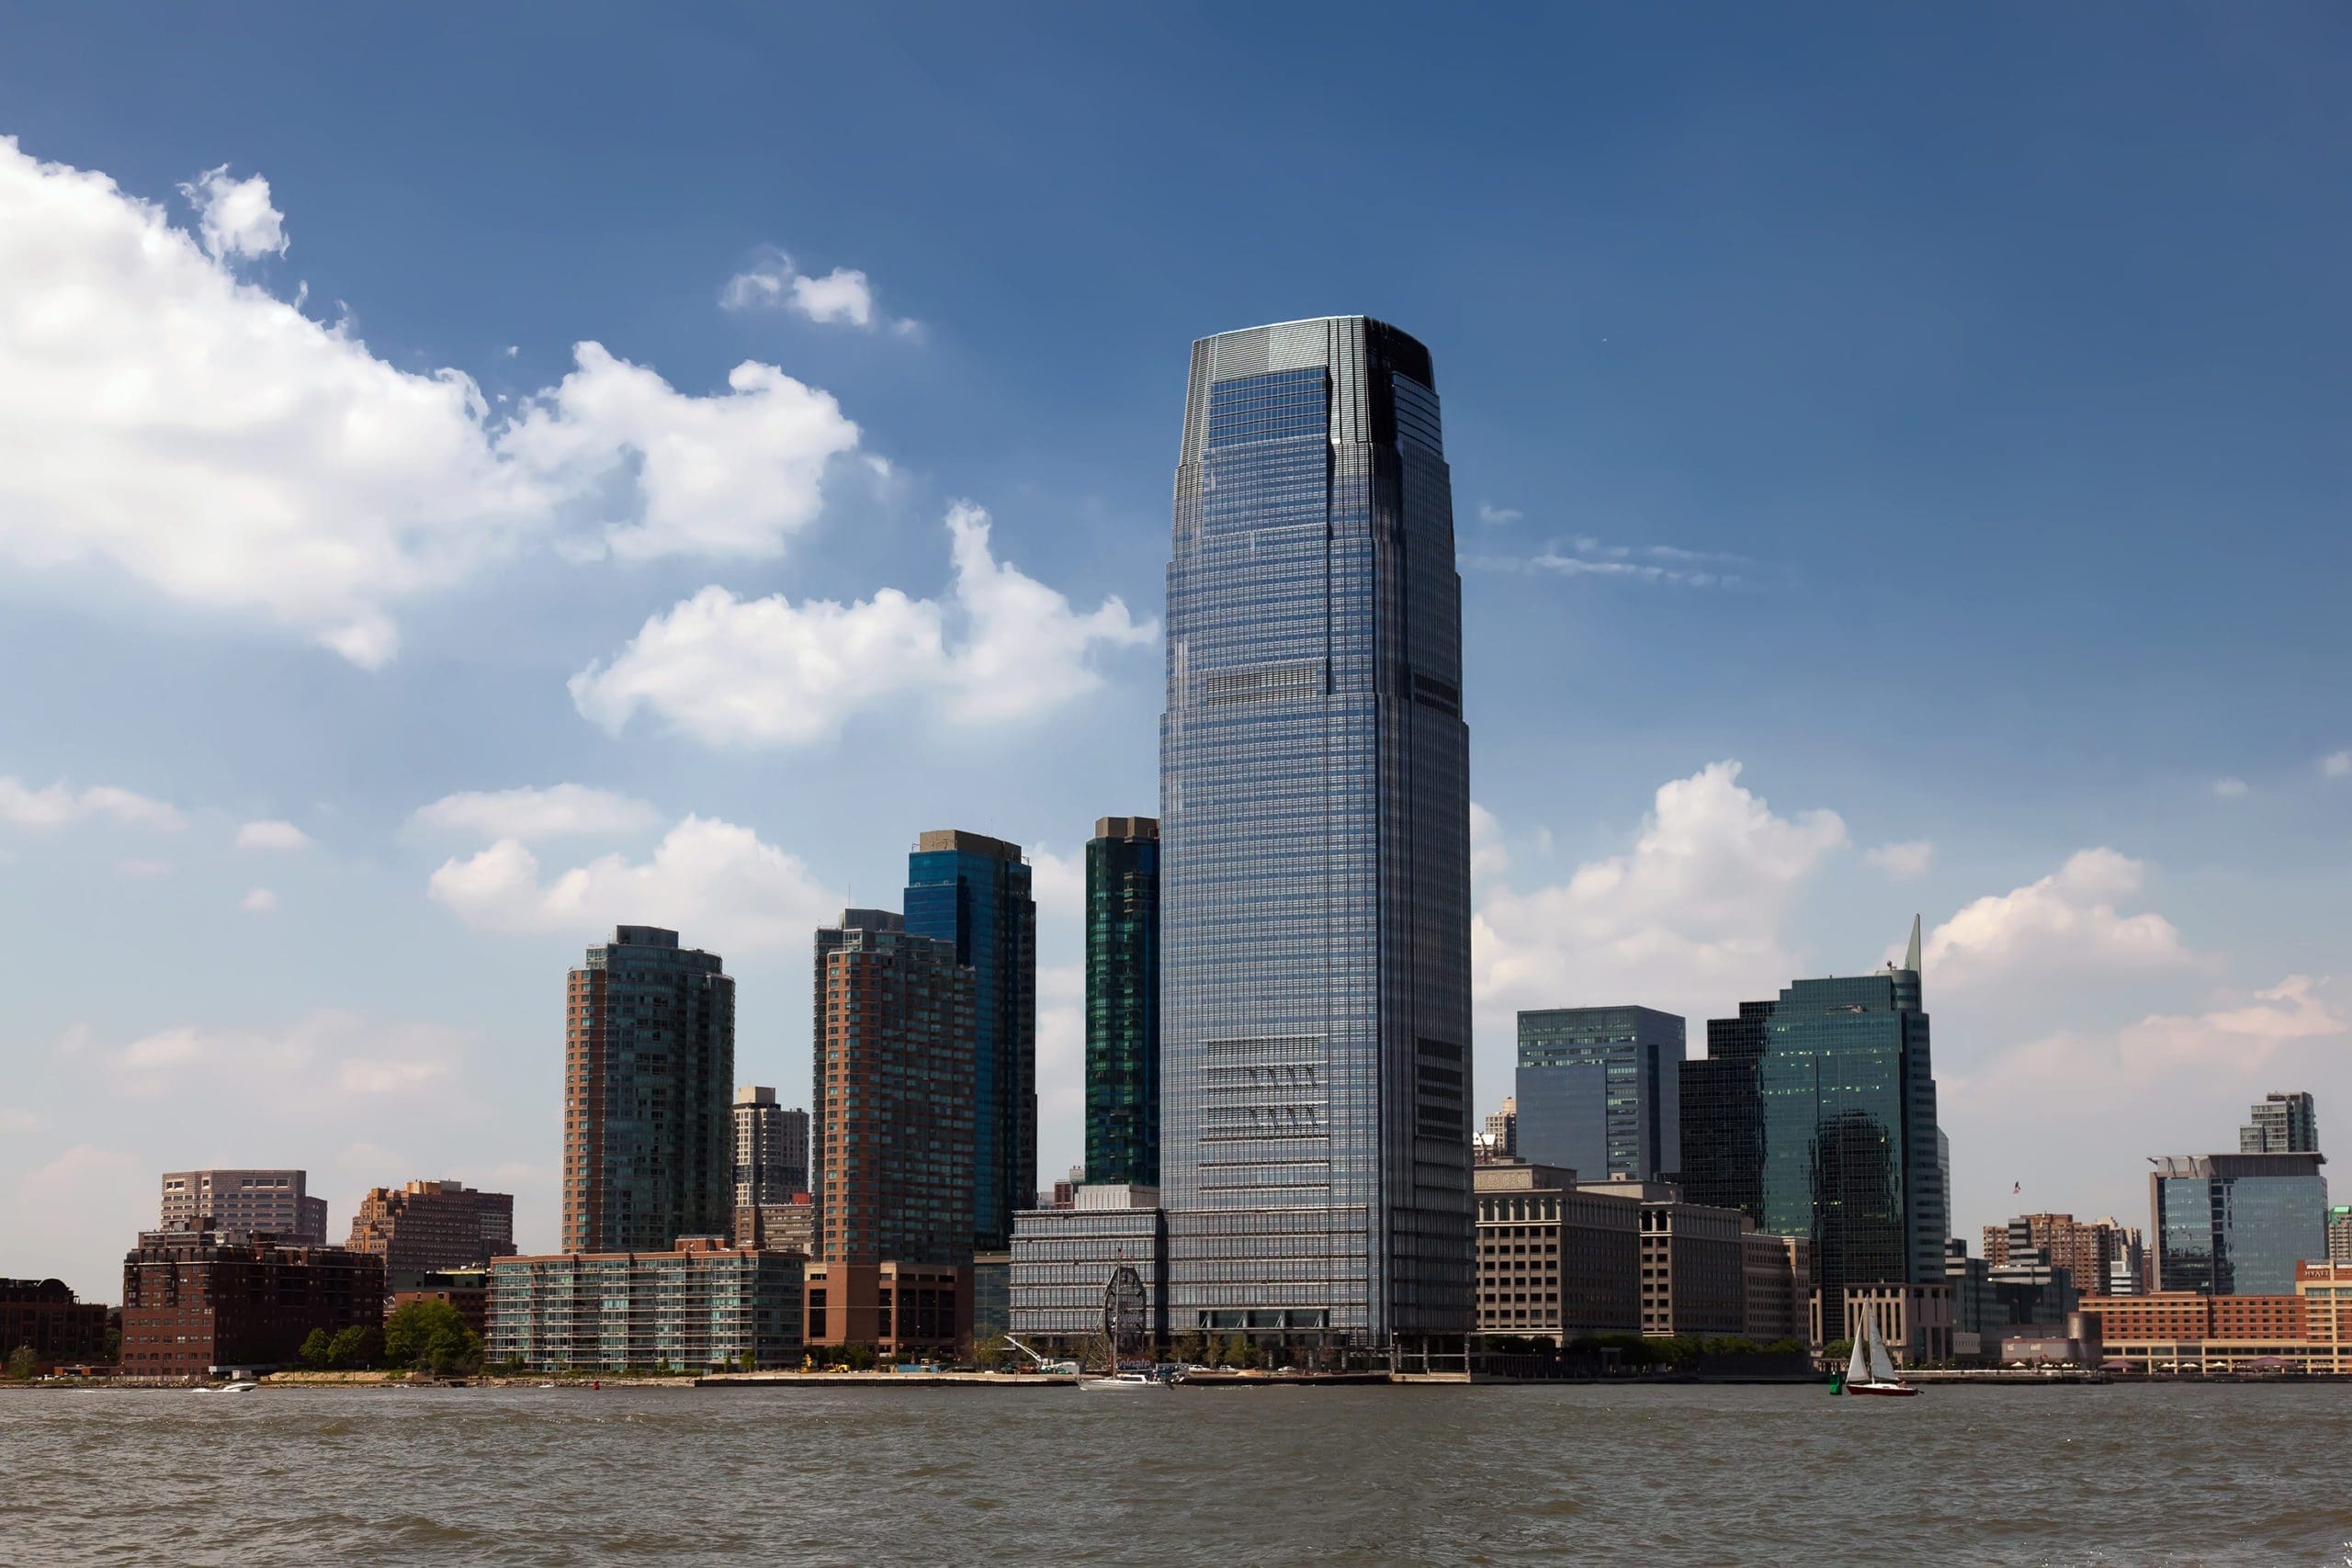 Goldman Sachs Tower in New Jersey